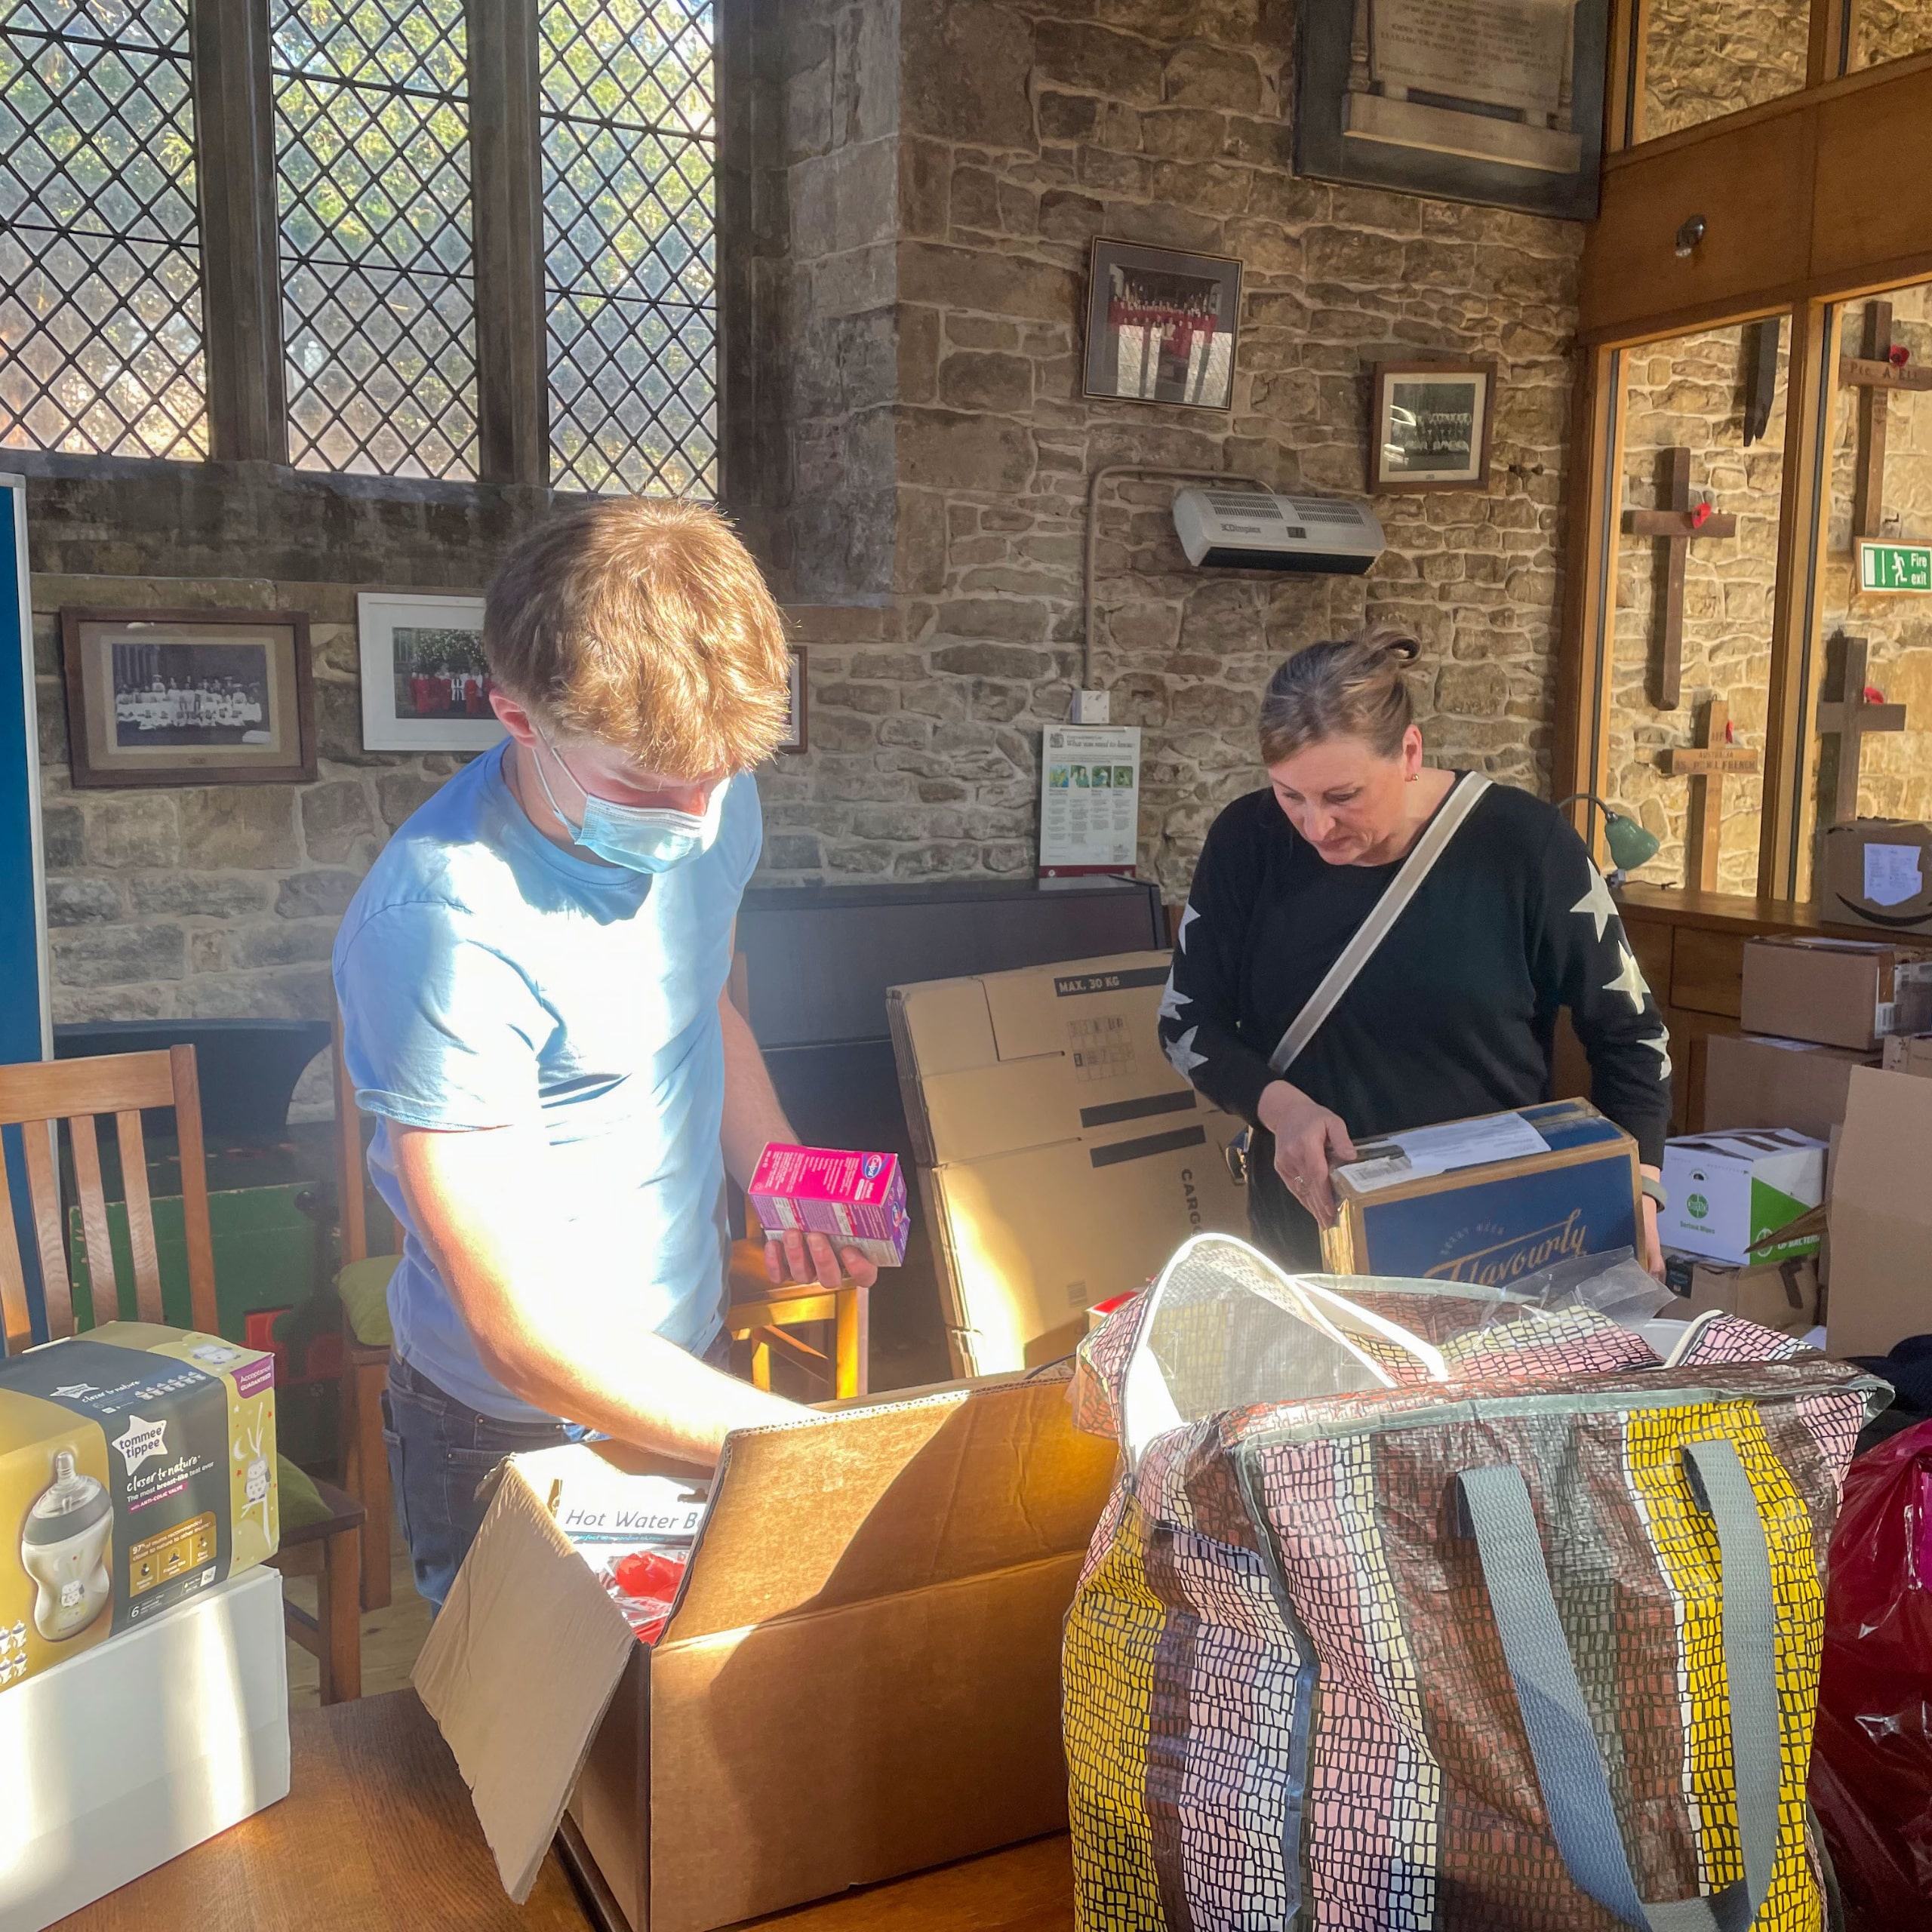 Deddington resident Fynn Watt and his mother sorting and packing items at the village collection hub for the people of Ukraine.